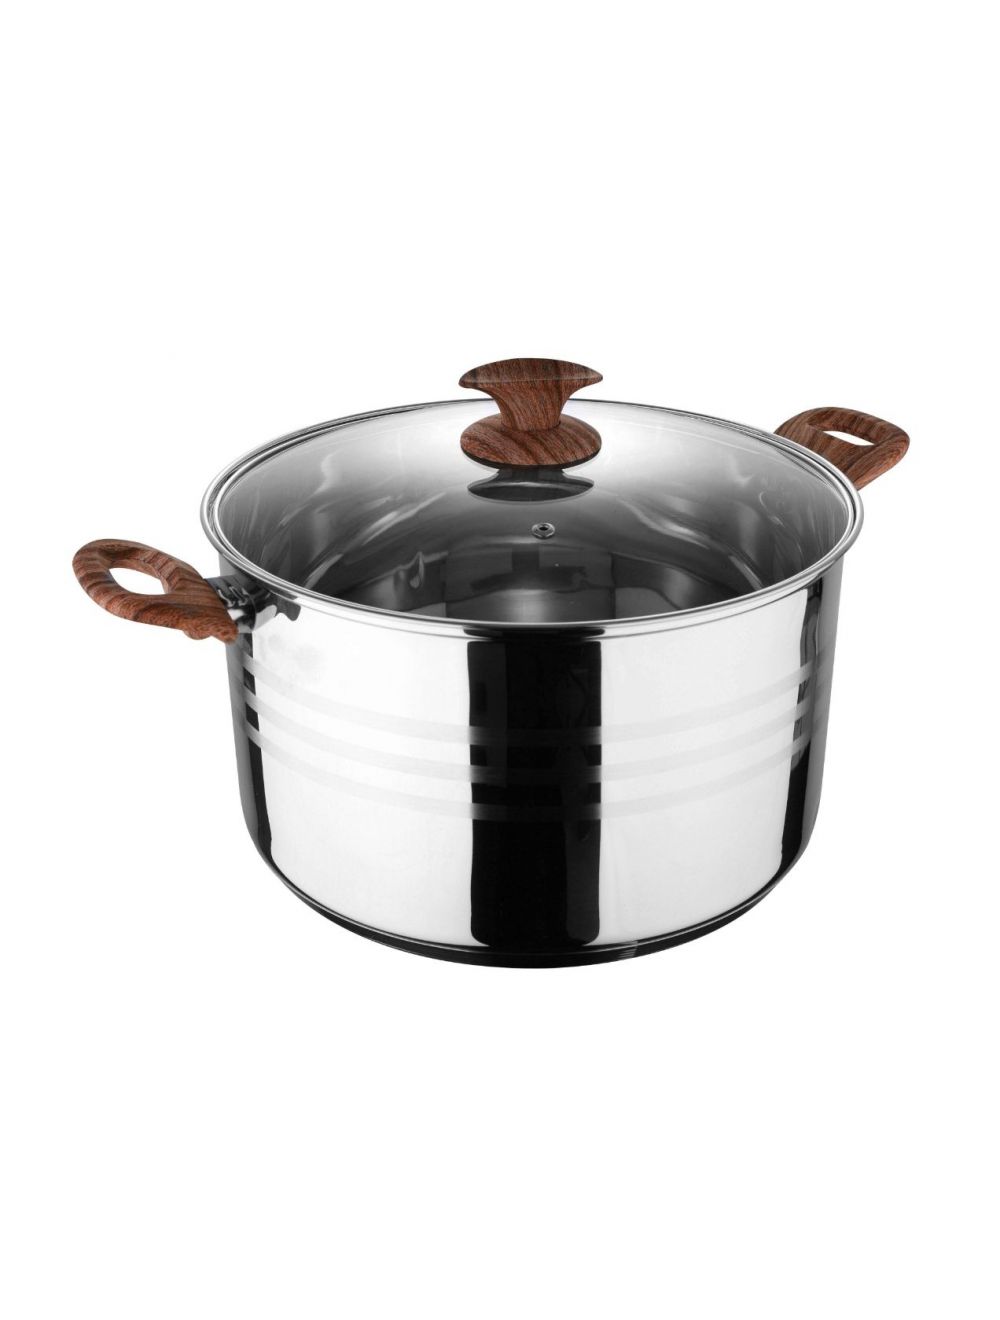 Royalford RF8552 32cm Stainless Steel Casserole with Glass Lid